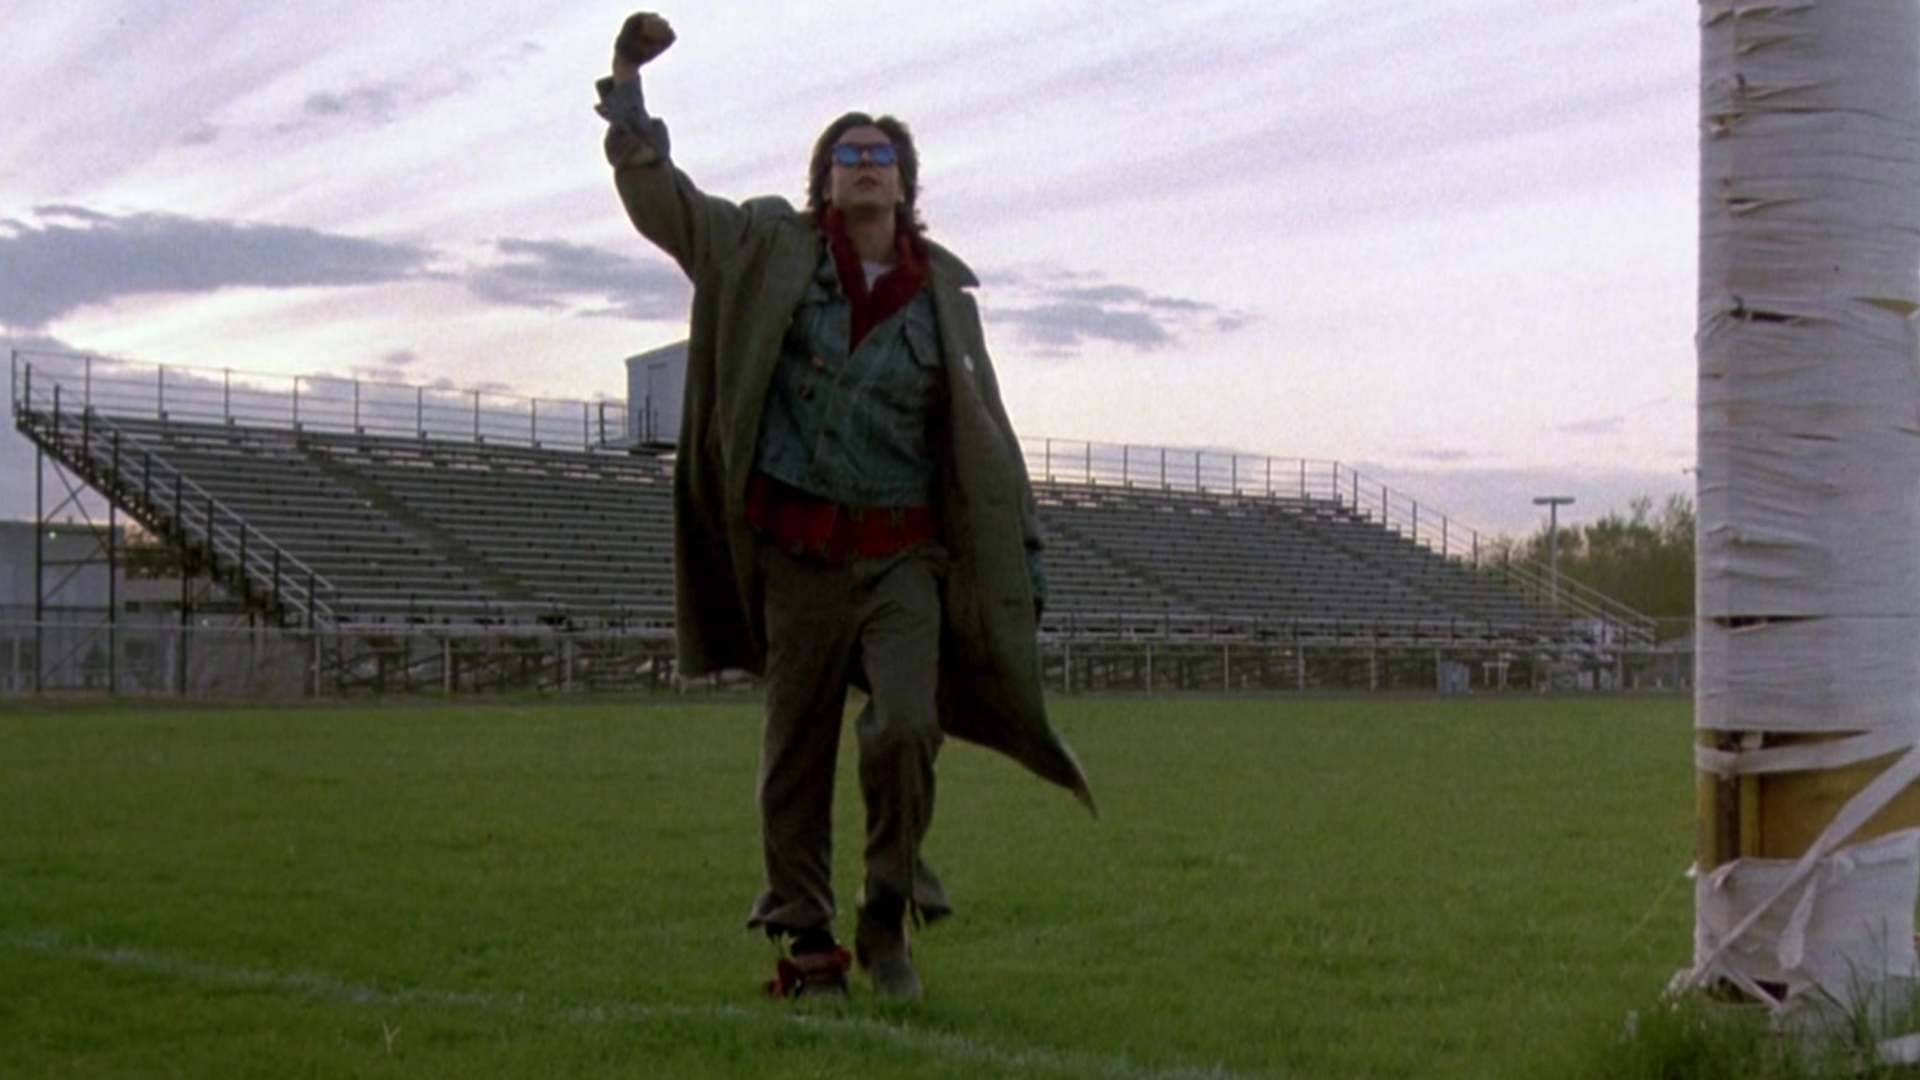 1920x1080 20+ The Breakfast Club HD Wallpapers and Backgrounds